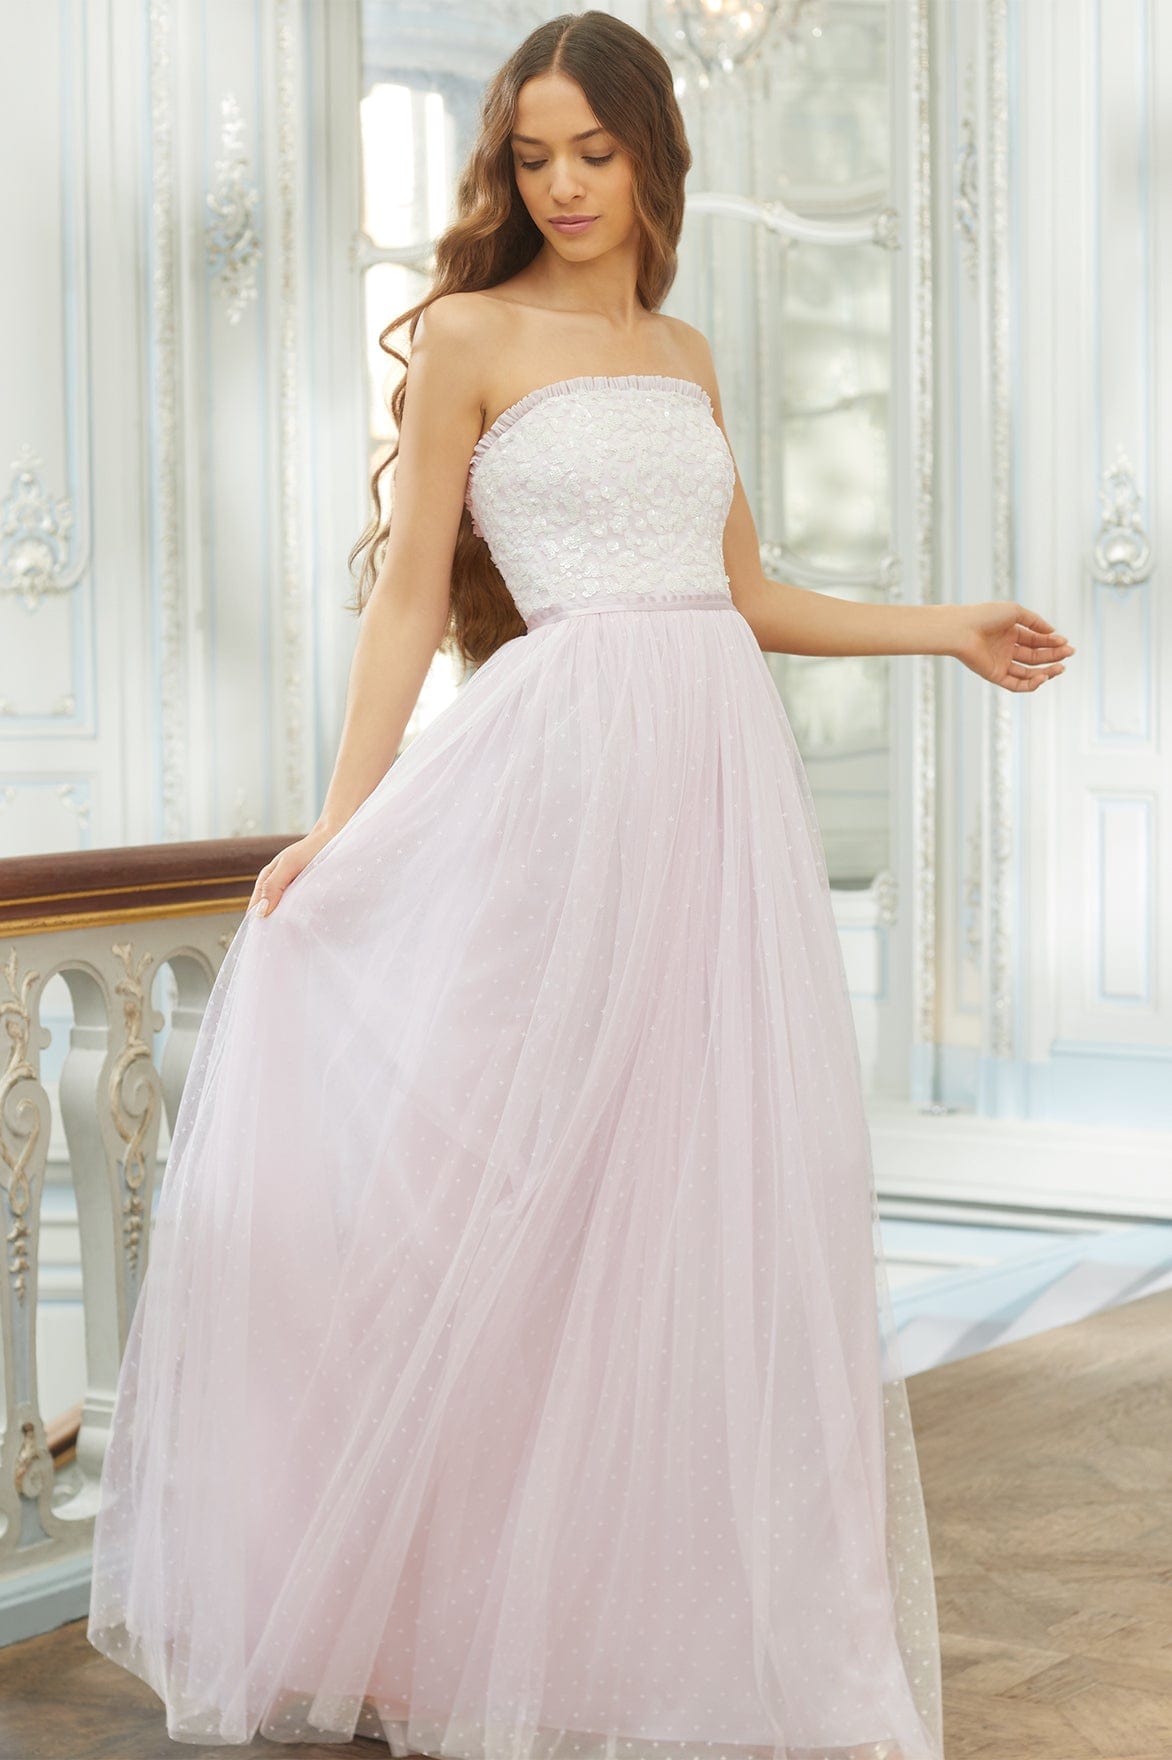 STRAPLESS CORSET BODICE GOWN